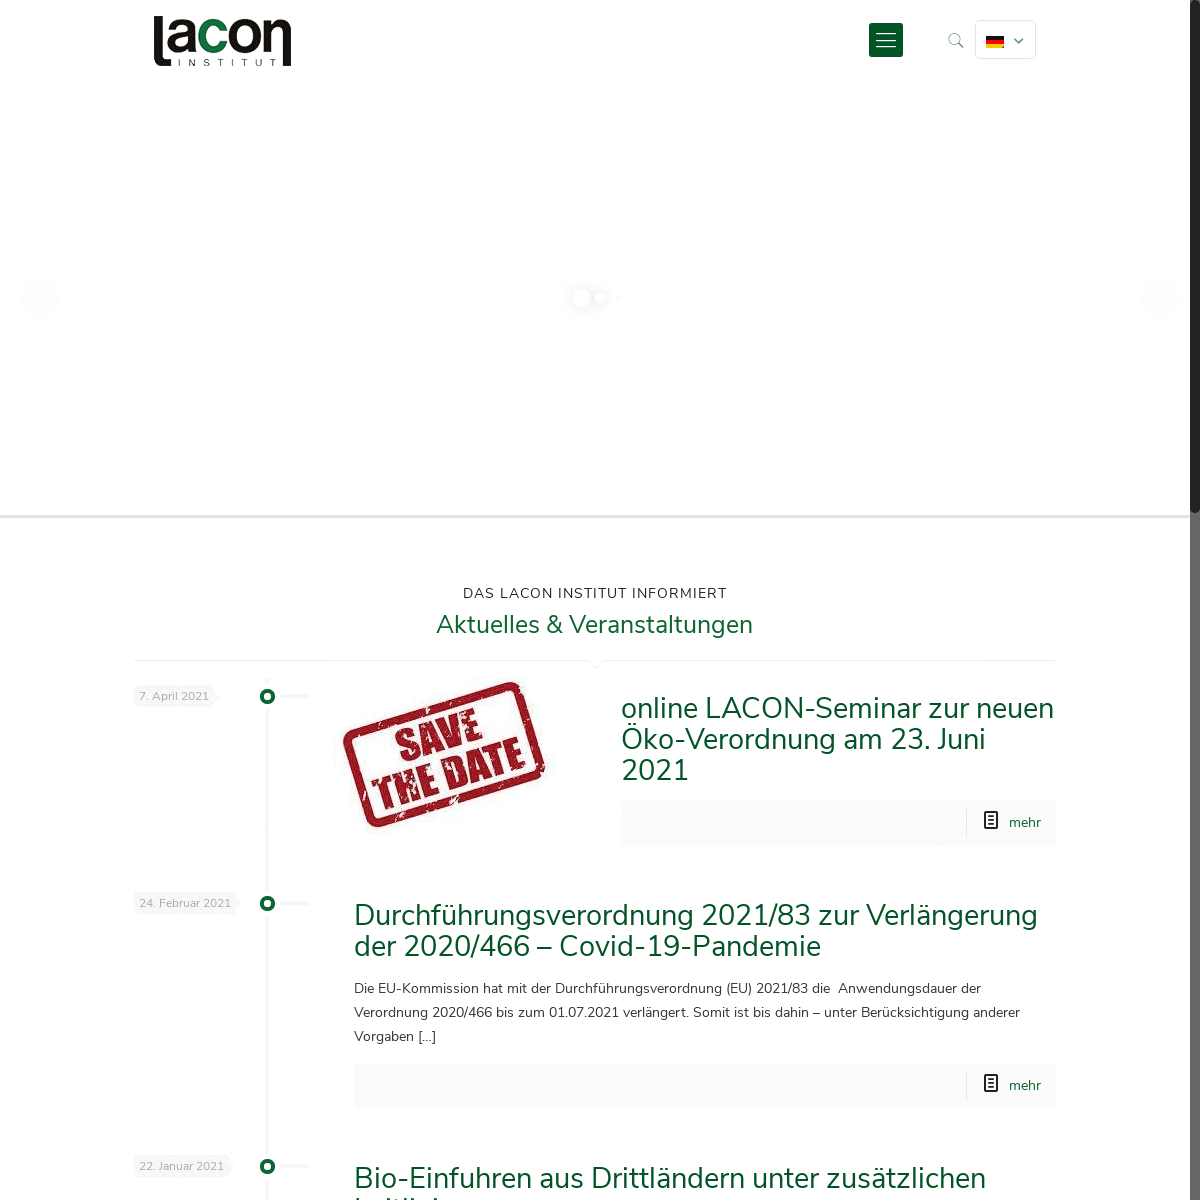 A complete backup of https://lacon-institut.com